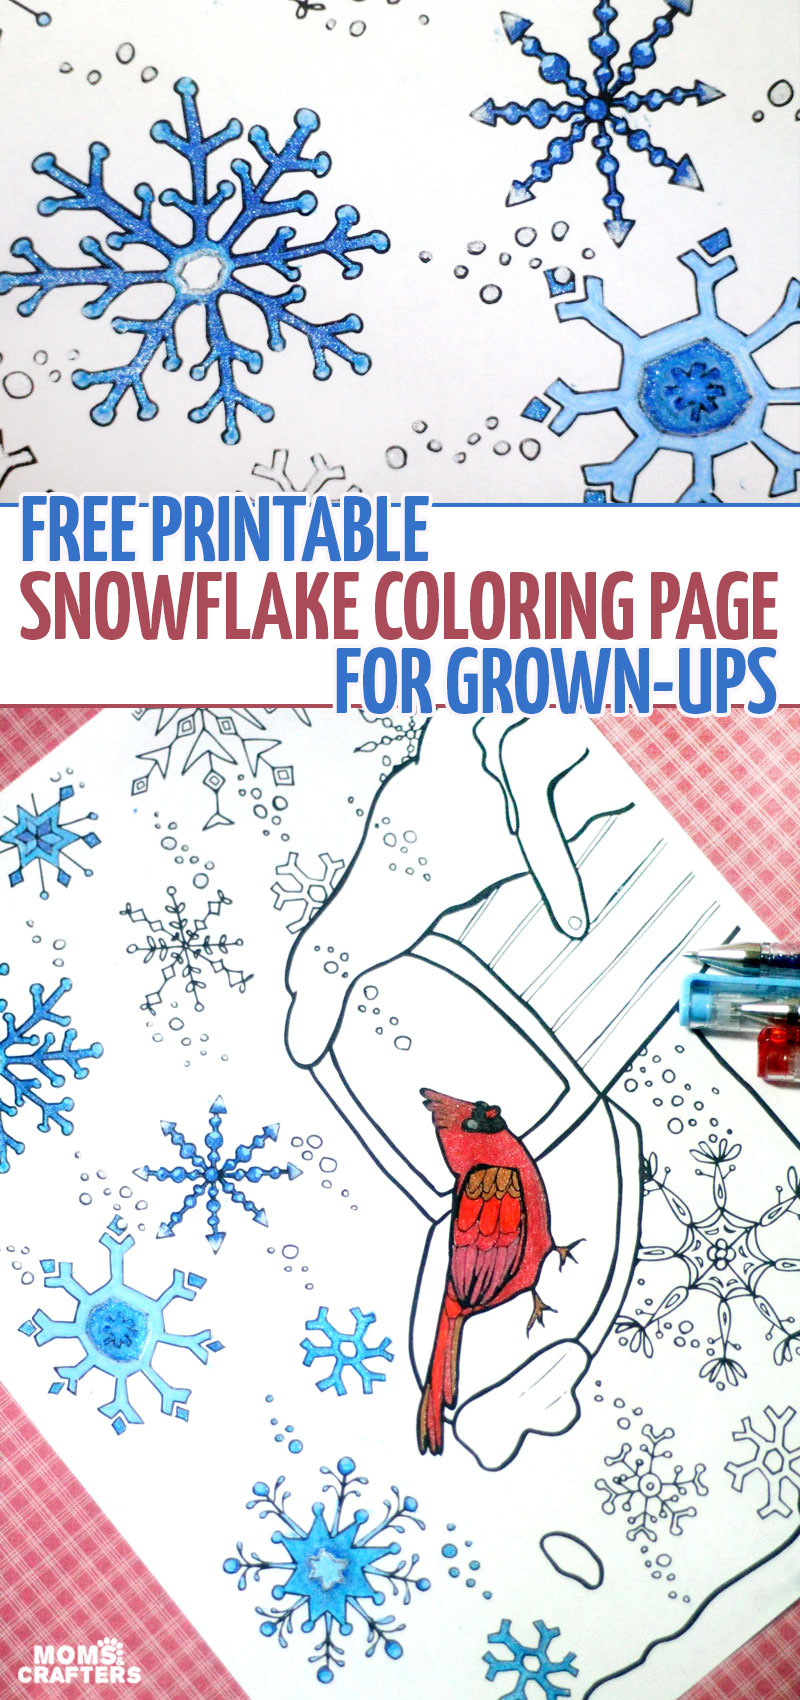 Winter snowflake coloring page for grown